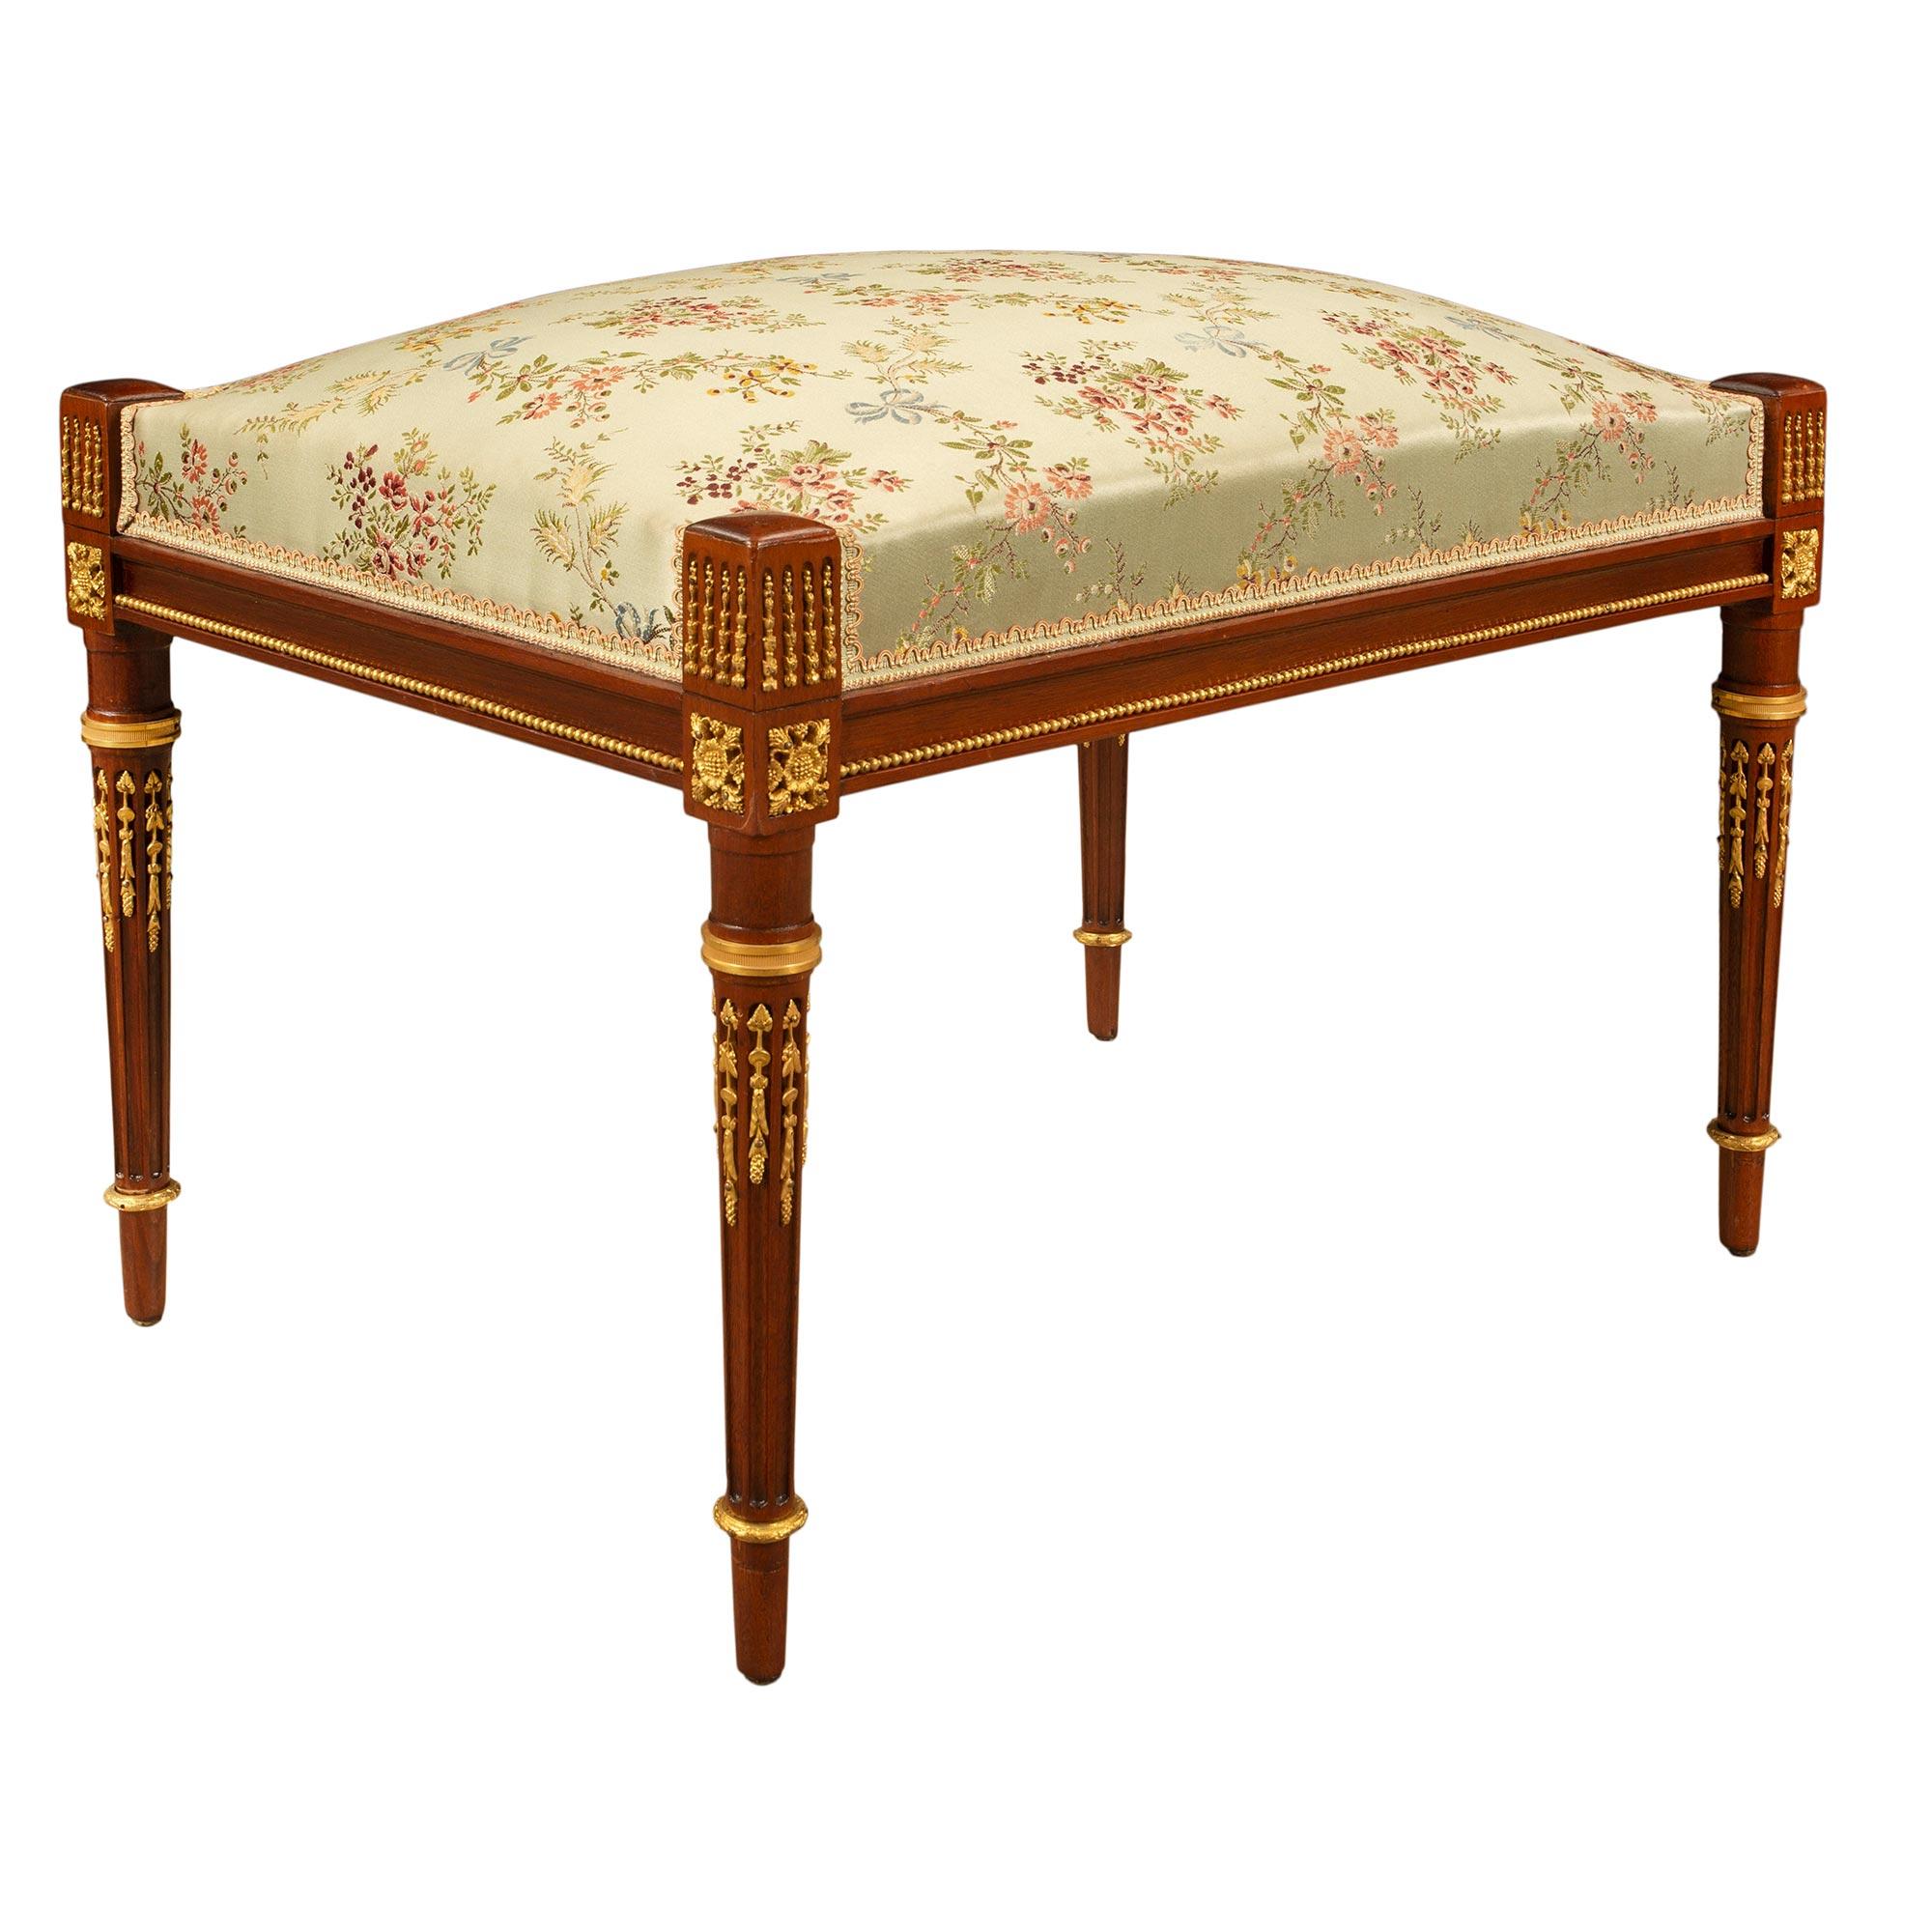 An extremely elegant and high quality French 19th century Louis XVI st. mahogany and ormolu bench. The bench is raised by slender circular tapered fluted legs with richly chased fitted ormolu chandelles and mottled top caps. Above each leg are